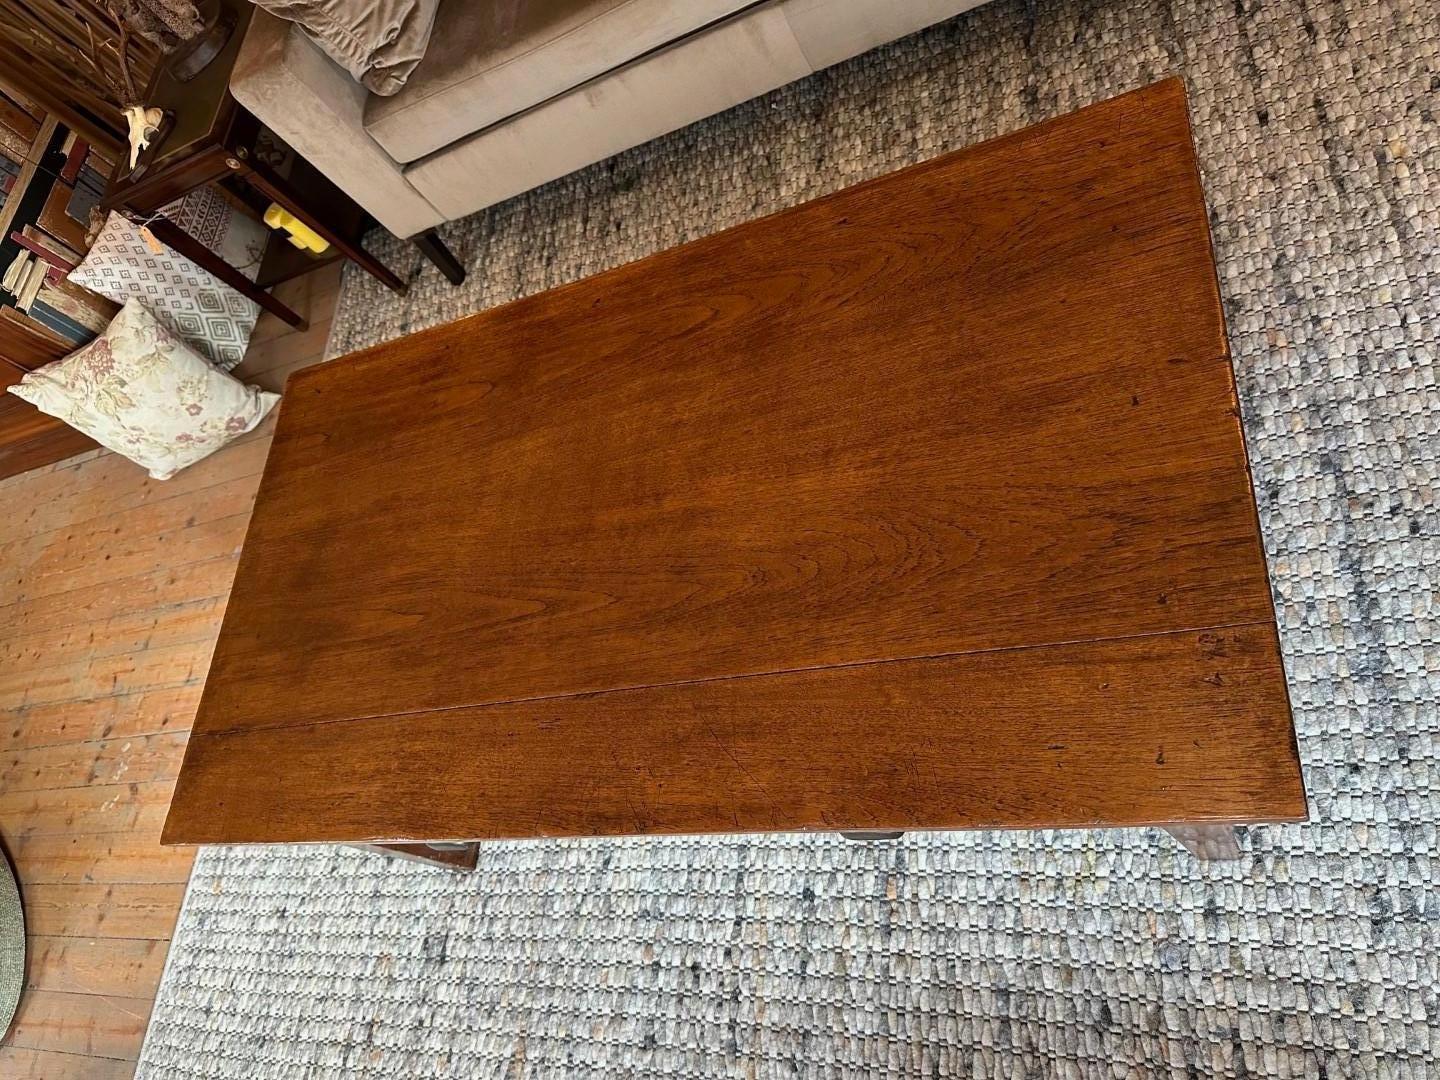 Antique teak coffee table with 2 drawers. Completely in good condition. Beautiful warm color. Leaf has signs of use.

Origin: Dutch East Indies
Size: 137cm x 76cm x h. 48cm
Period: ca. 1900